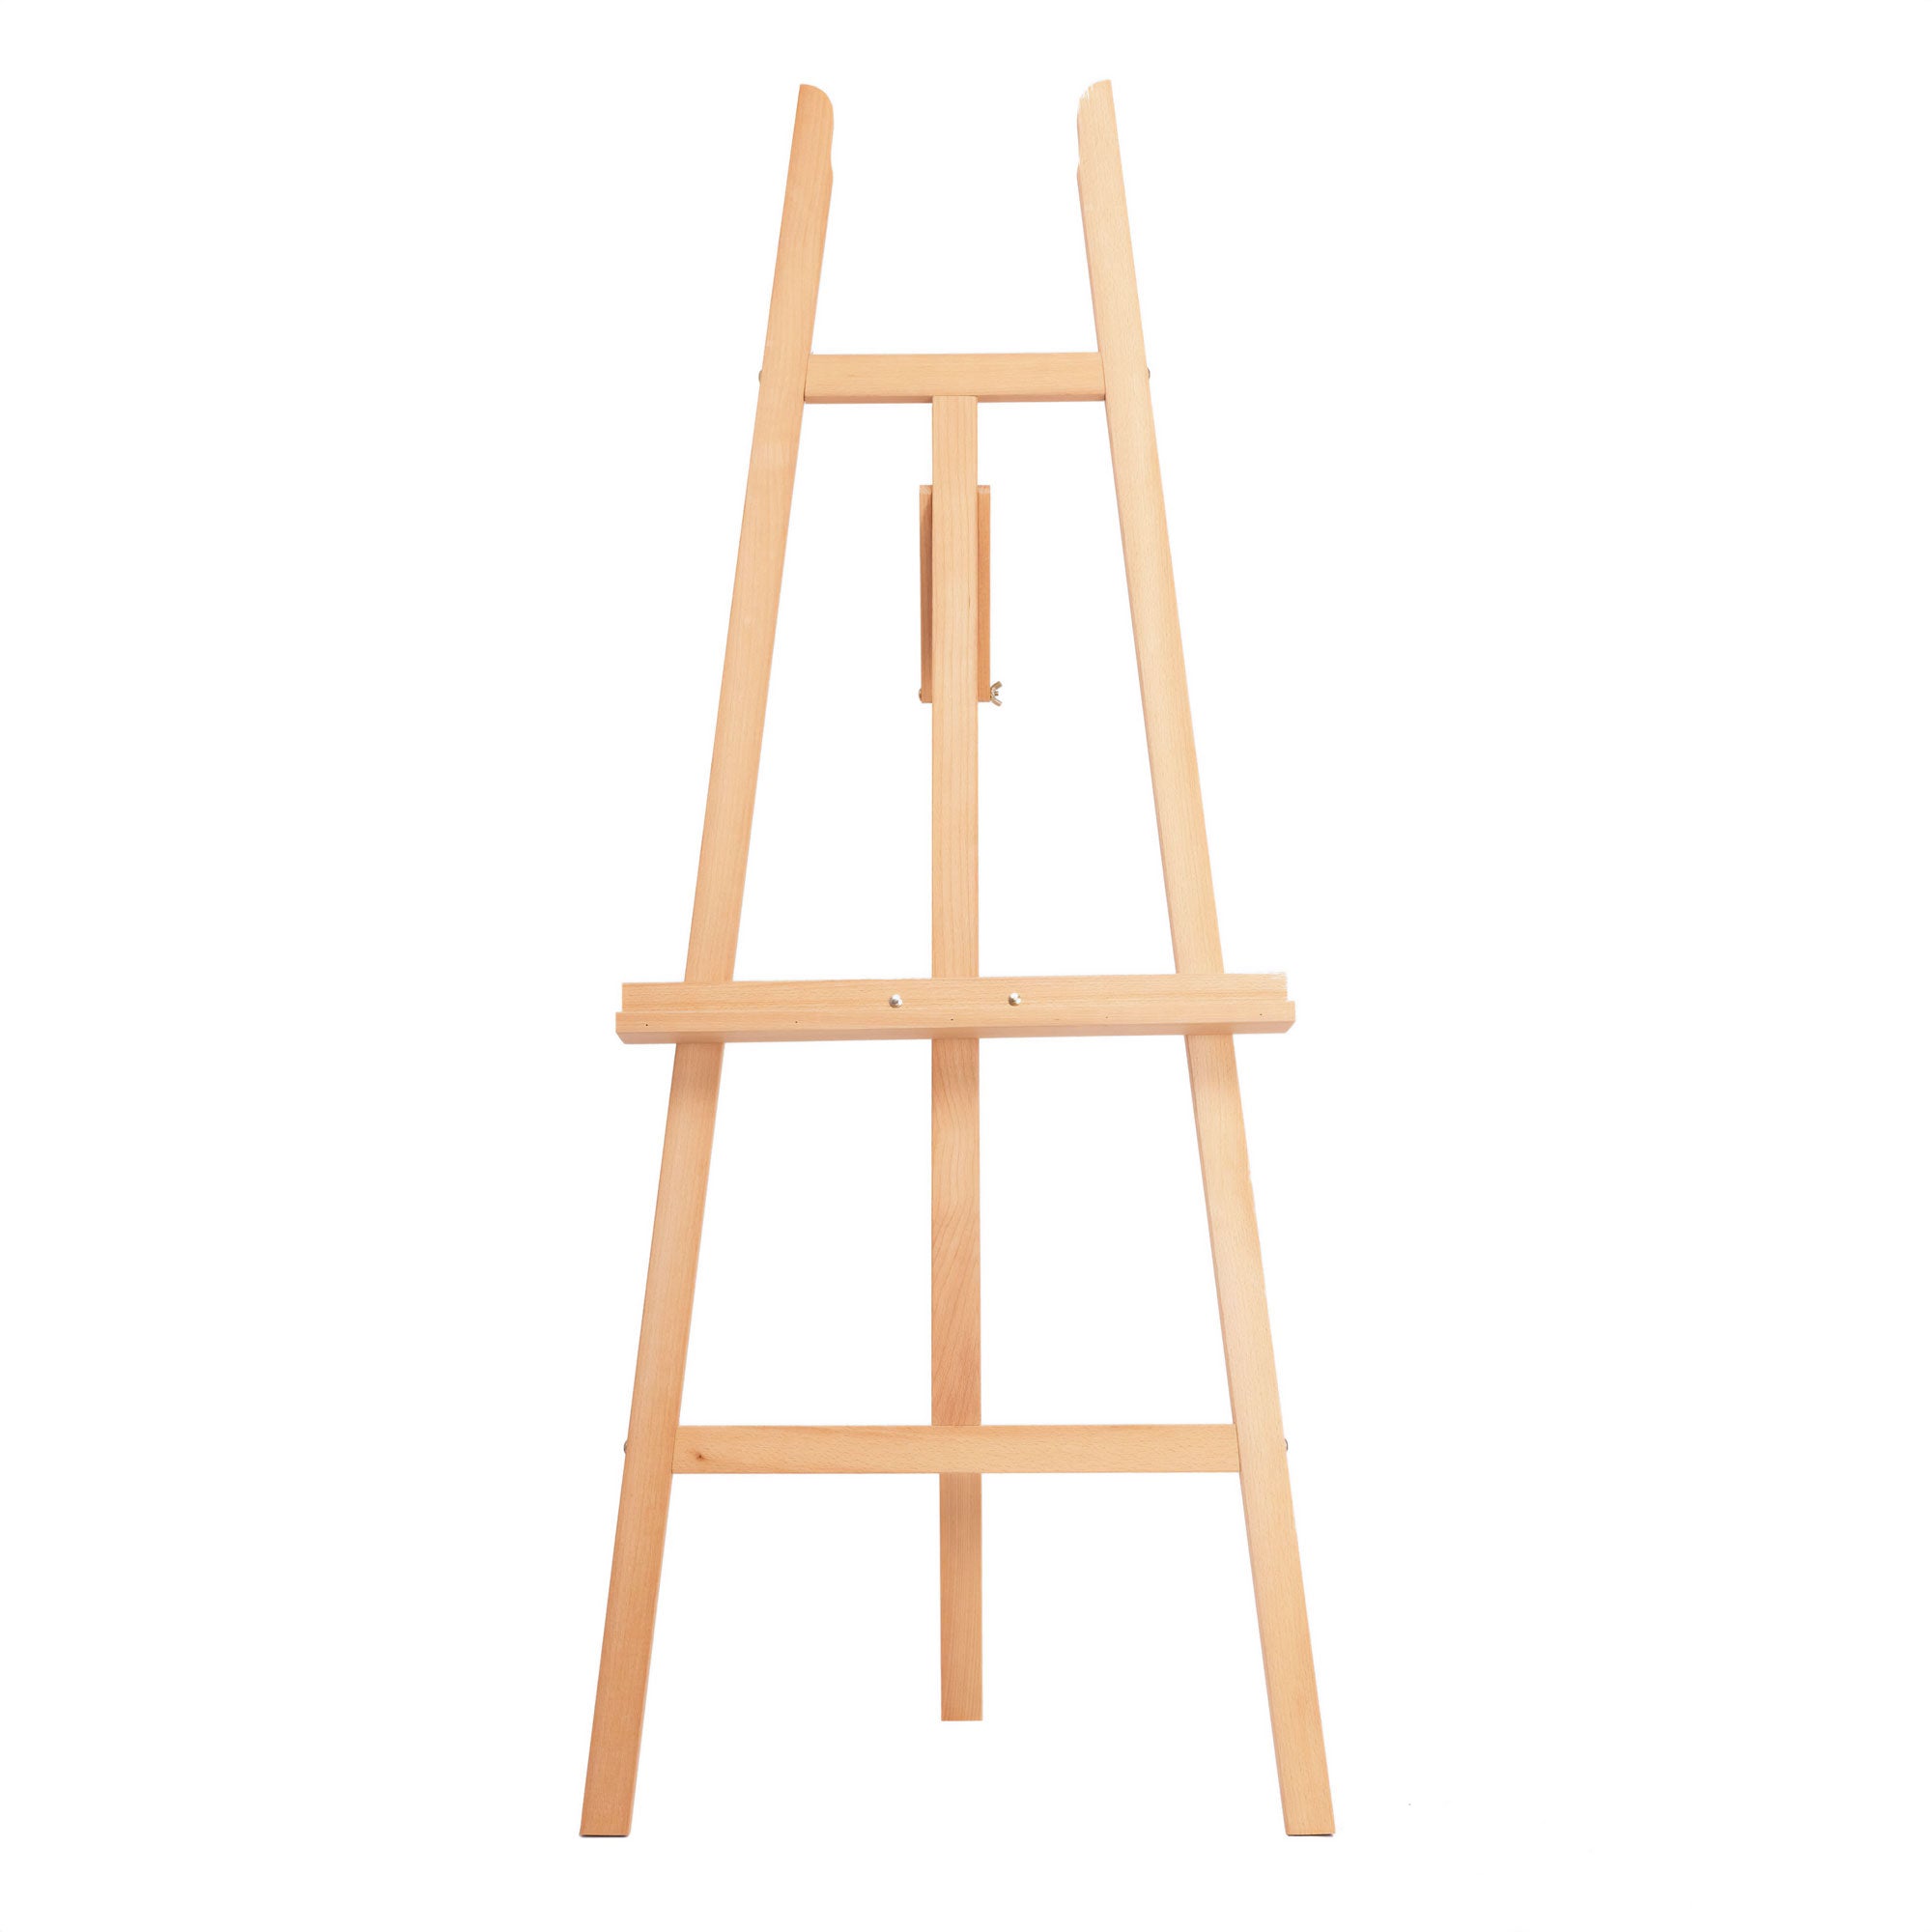 The Grizedale Mini Wooden A-frame Easel for Painting, Signs & Display 